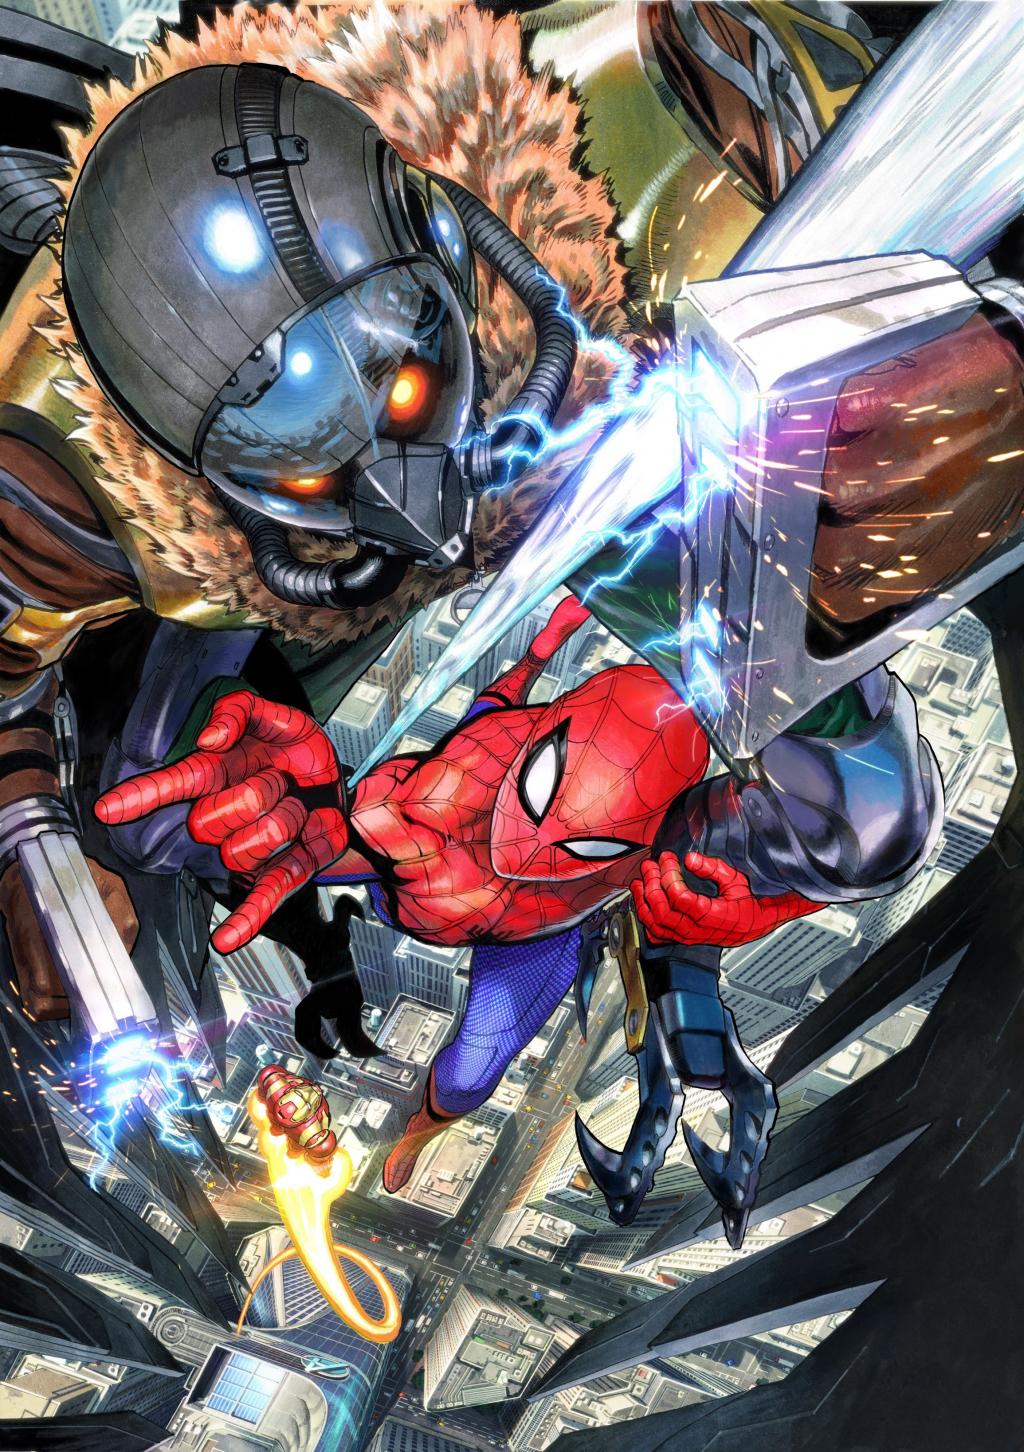 iron_man_spider_man_and_vulture_spider_man_homecoming_and_etc_drawn_by_murata_yuusuke_308cfdb4574d312d97c04e8db67b63a6.jpg